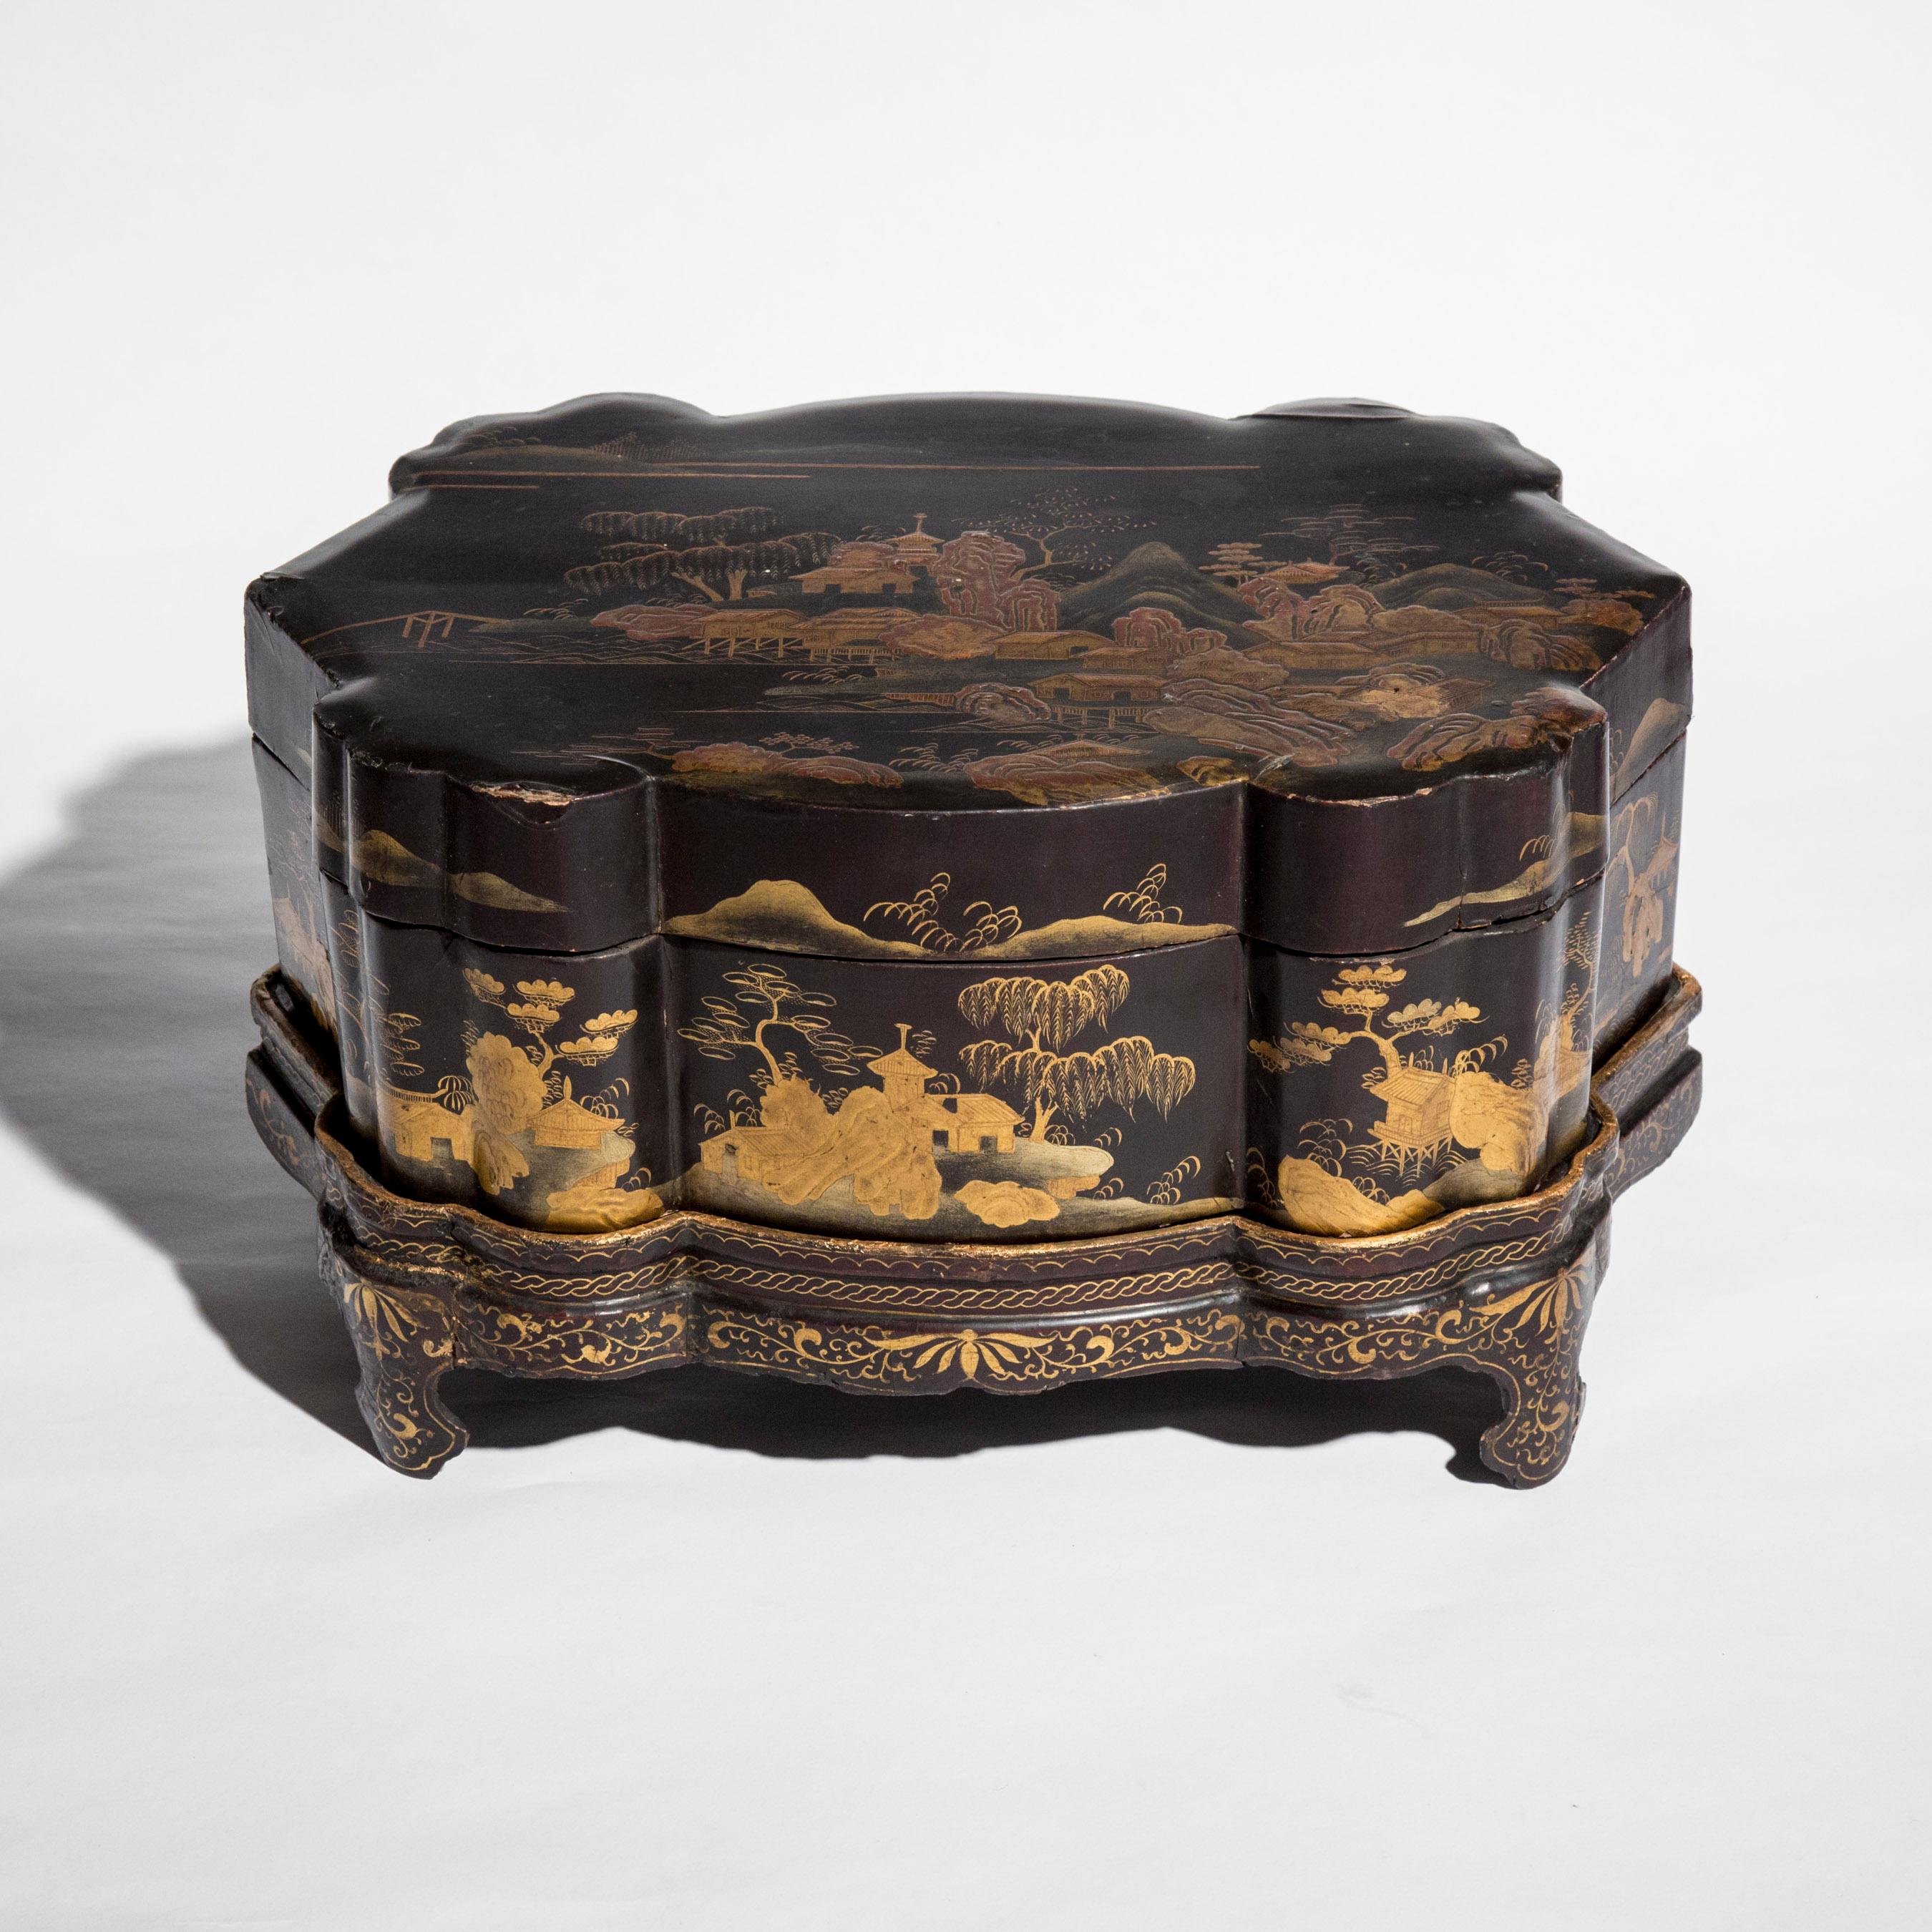 A fine late 19th century black lacquer and gold decorated box, of complex shape with lid and conforming tray stand
Japan, Meiji period, circa 1880.

In good antique condition, wear to decoration, historic restorations.